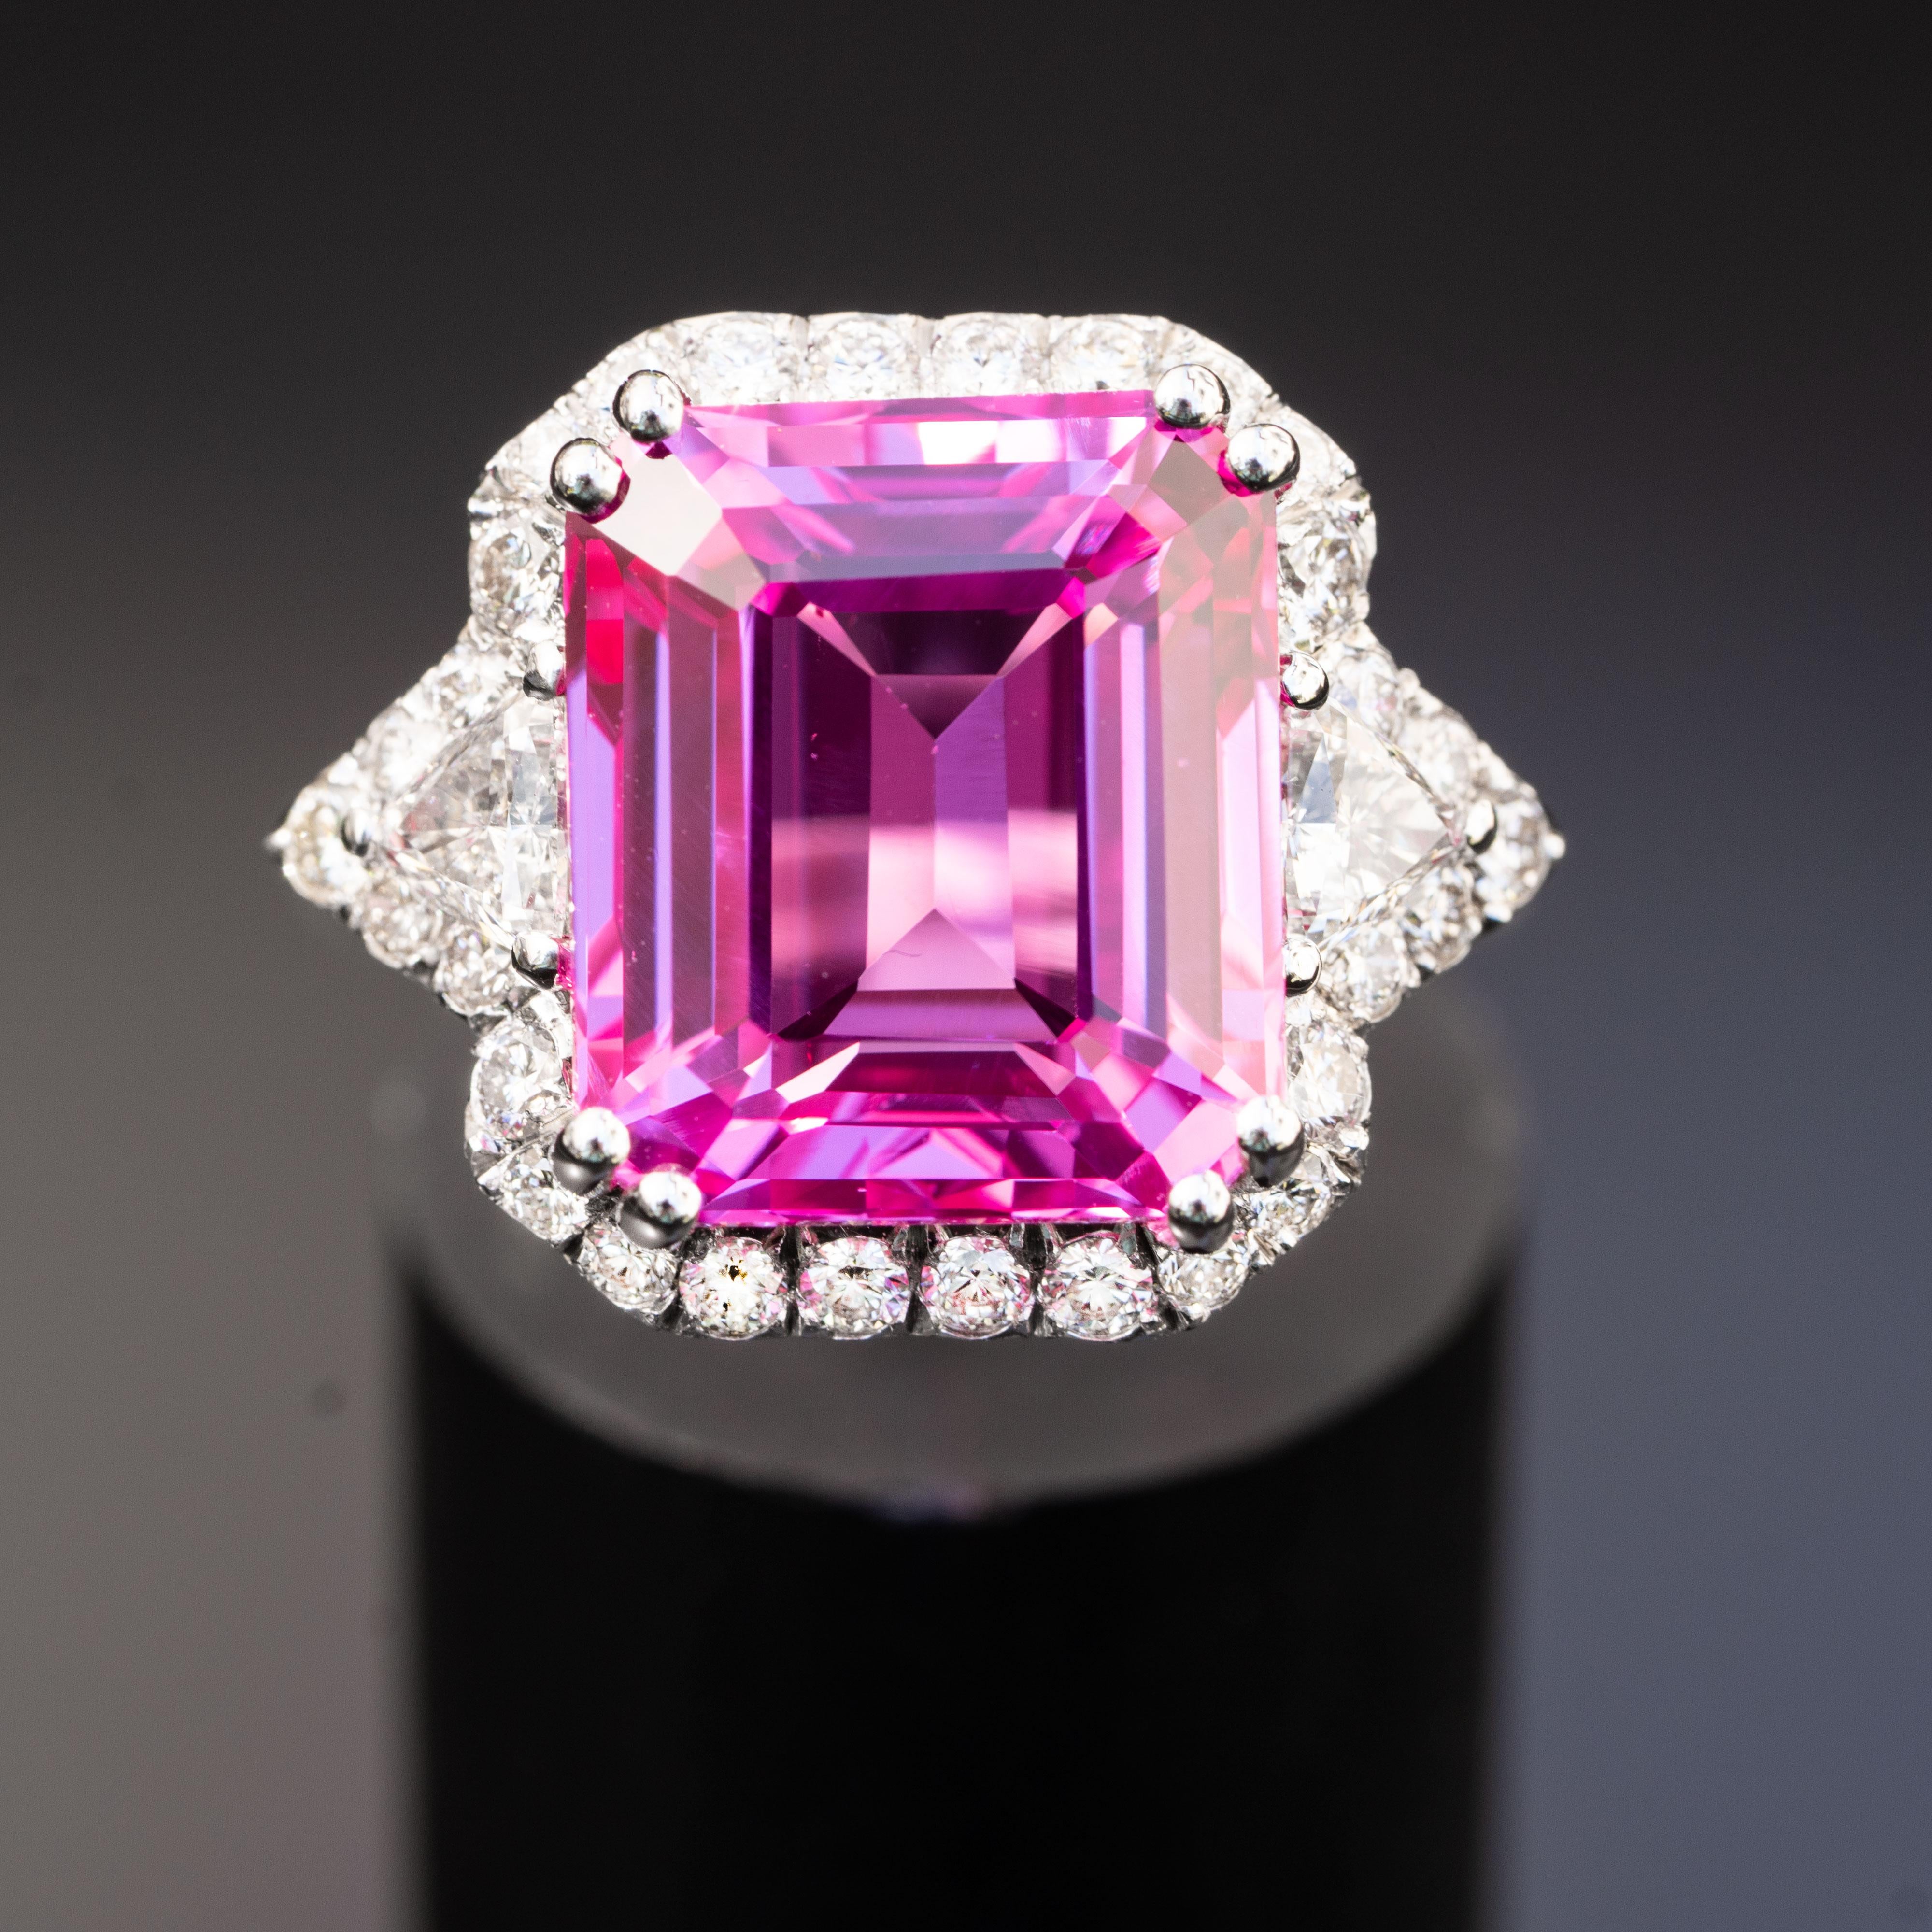 This gorgeous pink sapphire ring will impress everyone around you. It features a large emerald 13.00 carat gemstone, adorned with 1.20 carat natural diamonds.

Sapphire
Sapphire AAA+
Shape: Oval
Mineral: Corundum
Hardness: 9 on Moh's scale
Sapphire